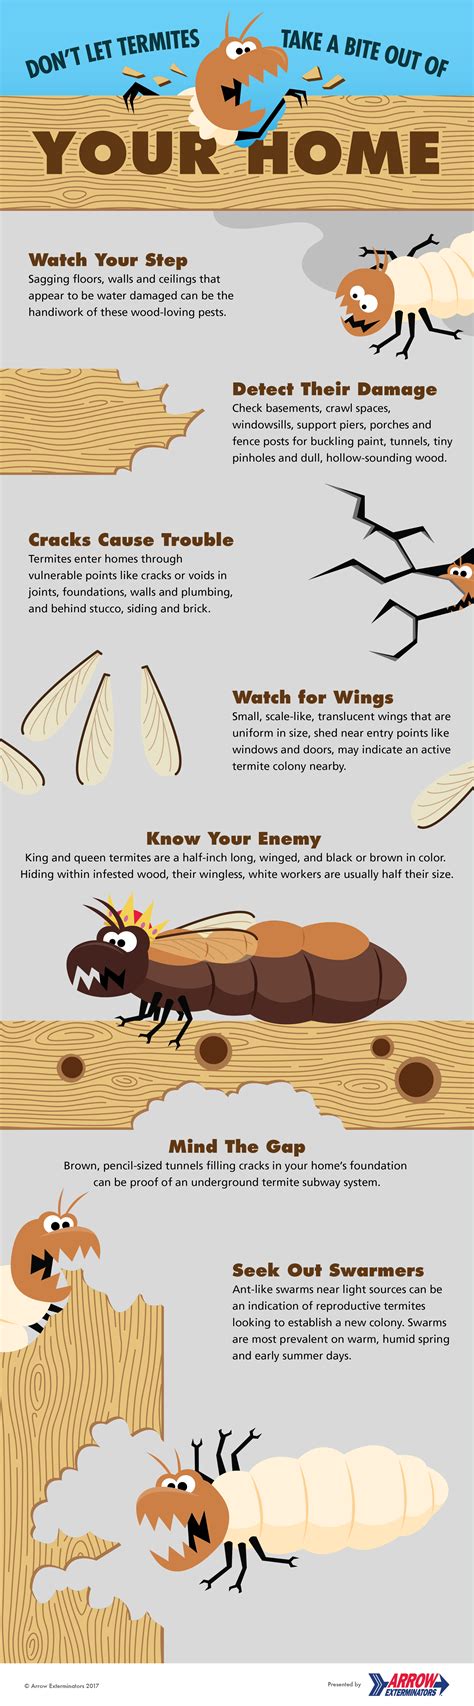 an infographic guide to detecting termites in your home